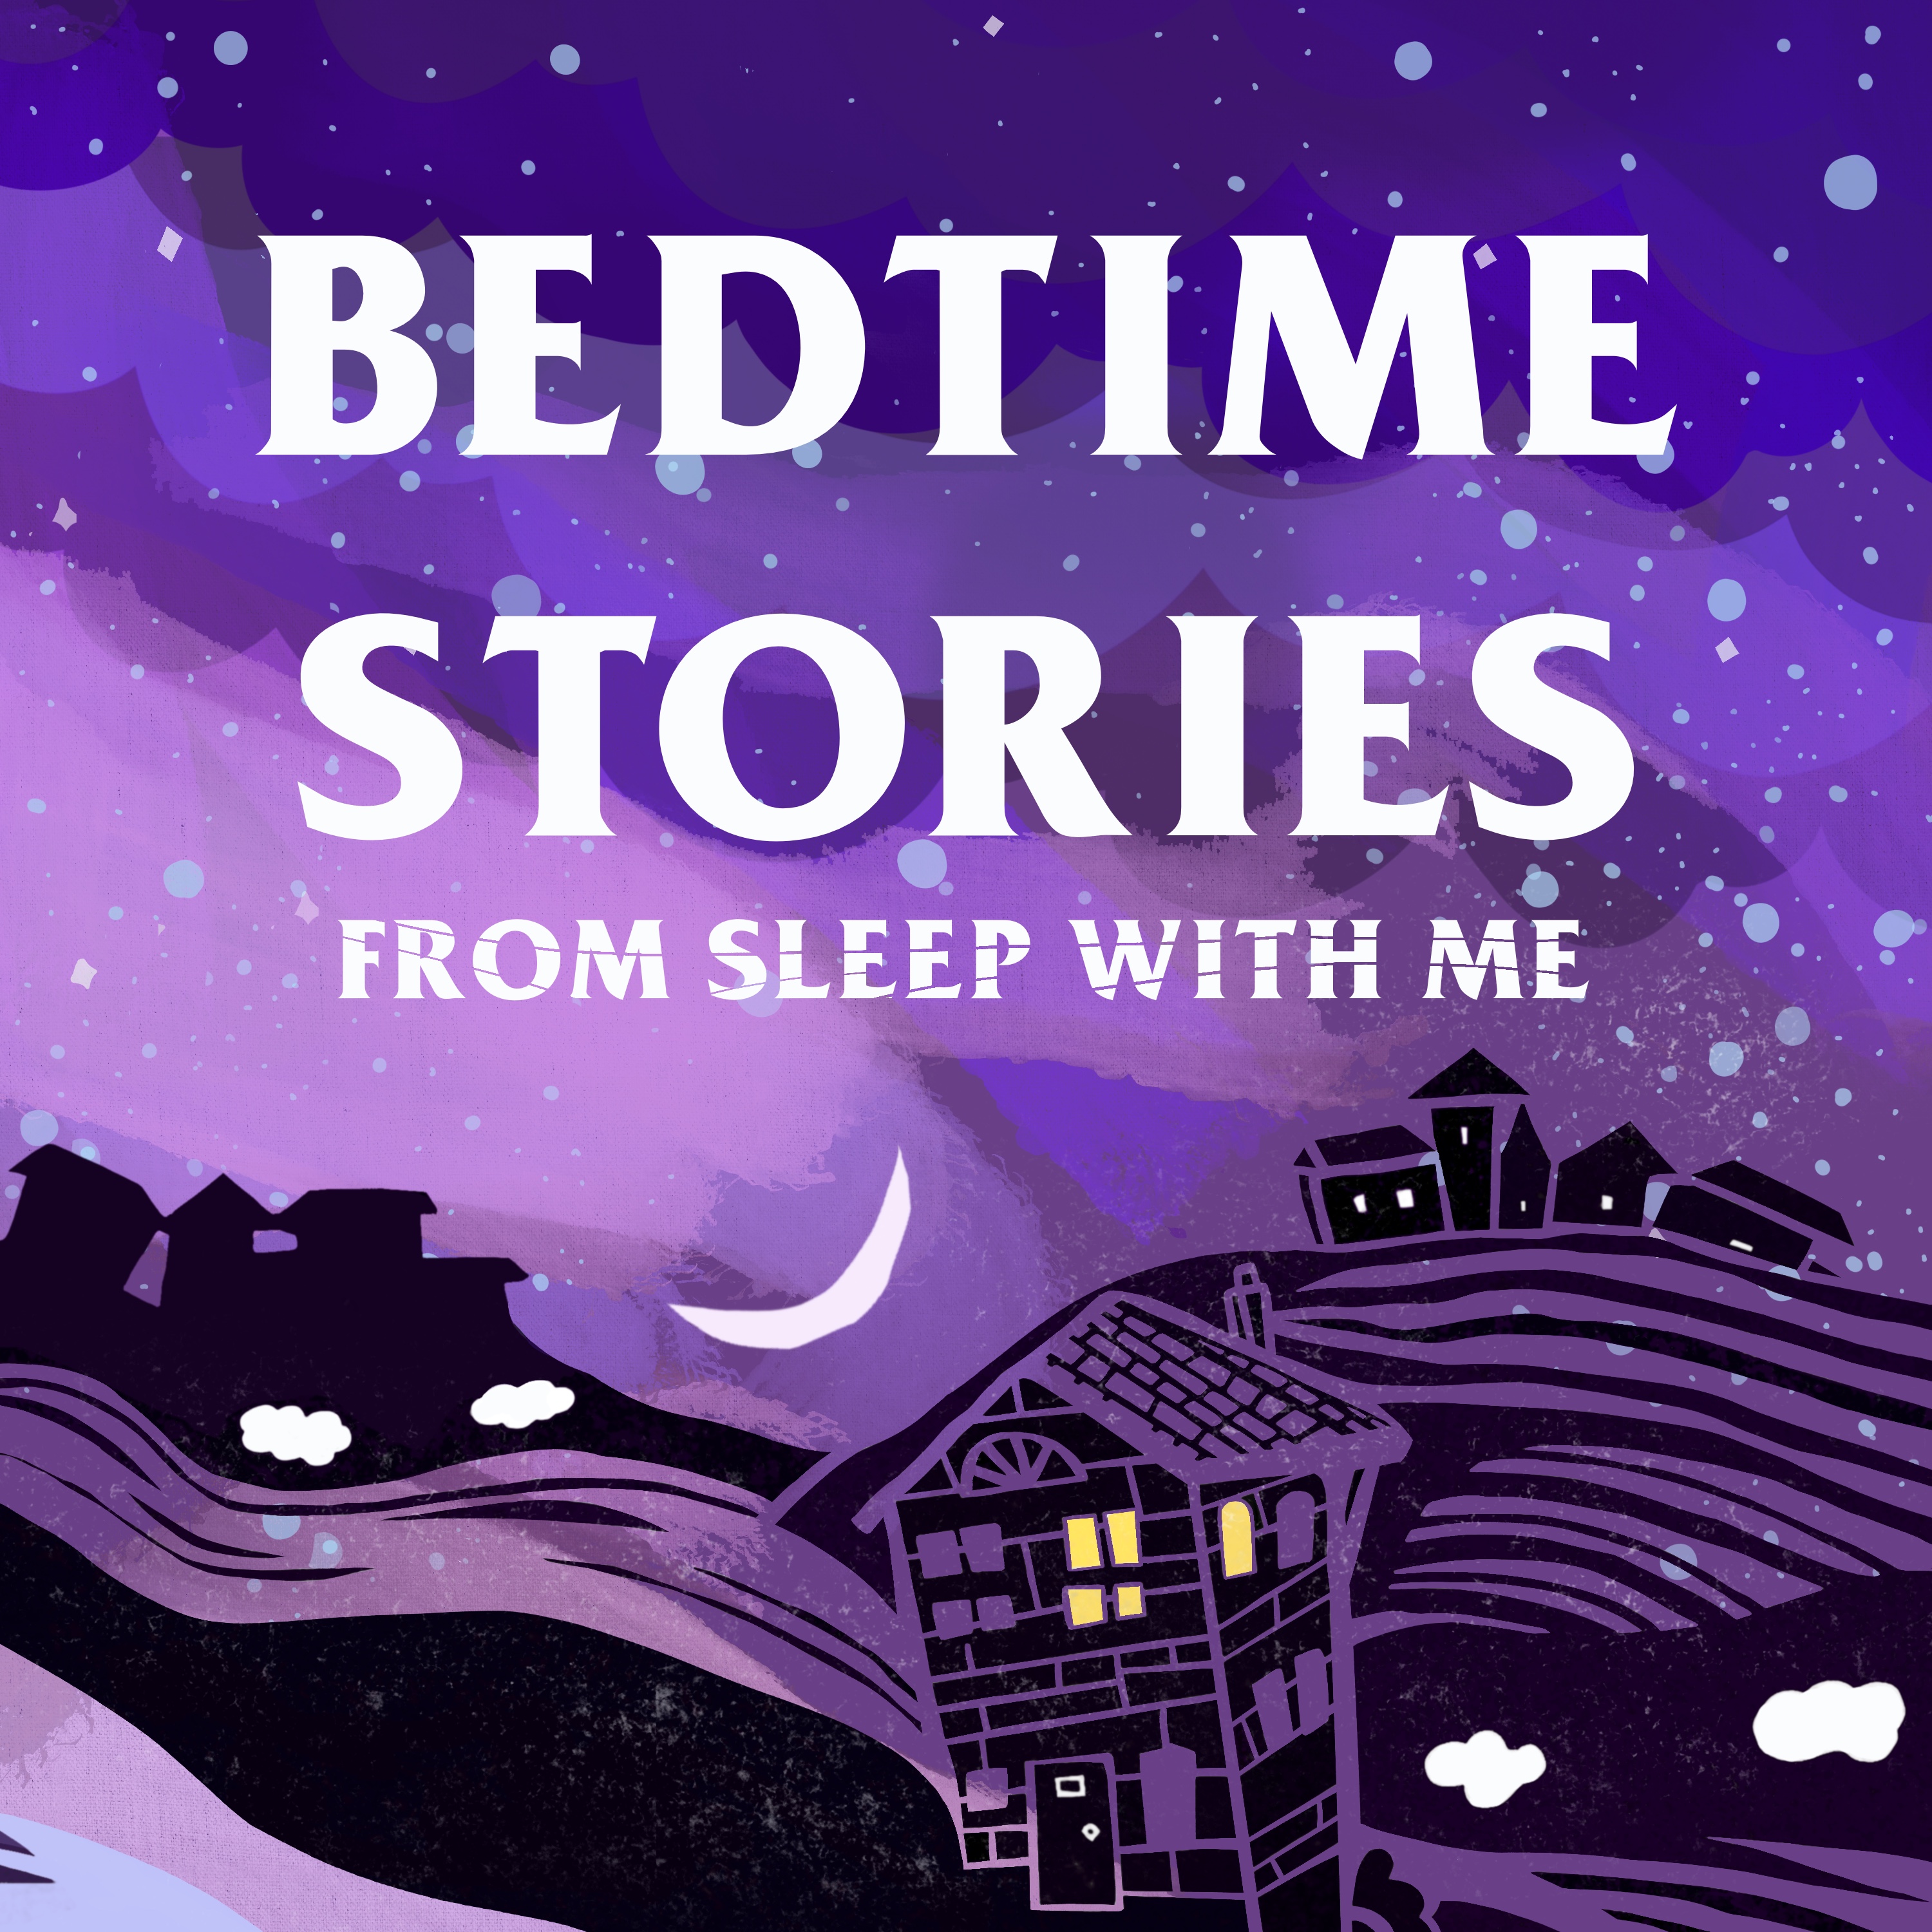 Bedtime Stories to Bore You Asleep from Sleep With Me:Silver Sleeper Productions LLC